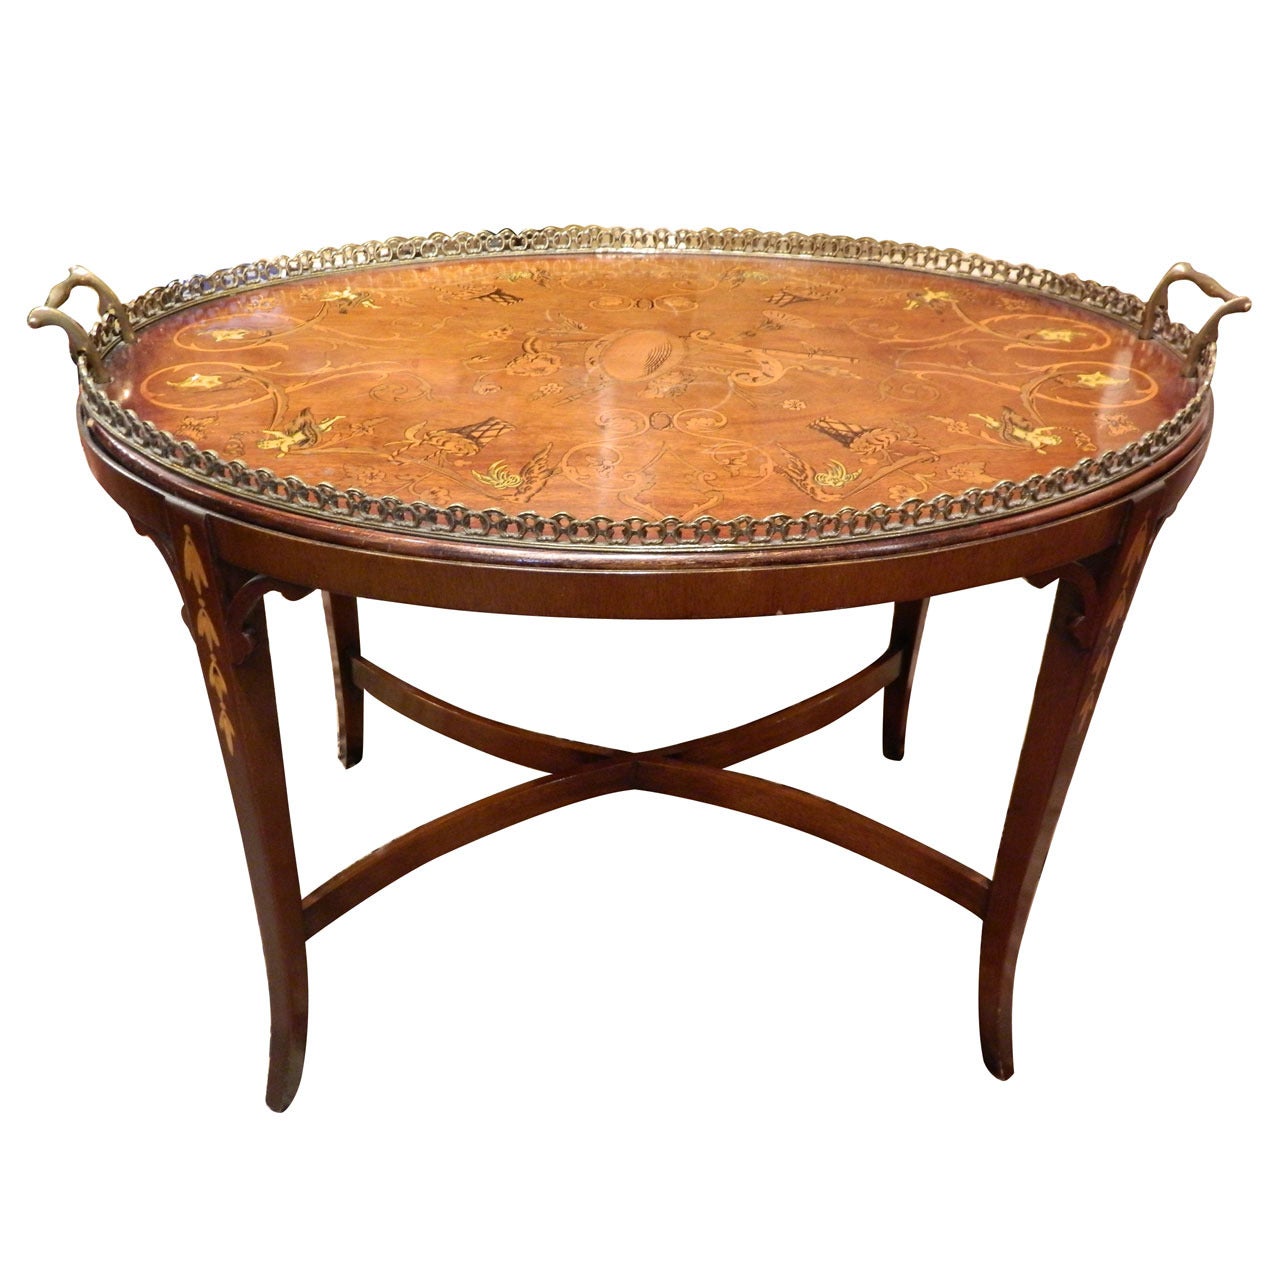 20th Century Edwardian Style Inlaid Mahogany and Silver Tray on Stand